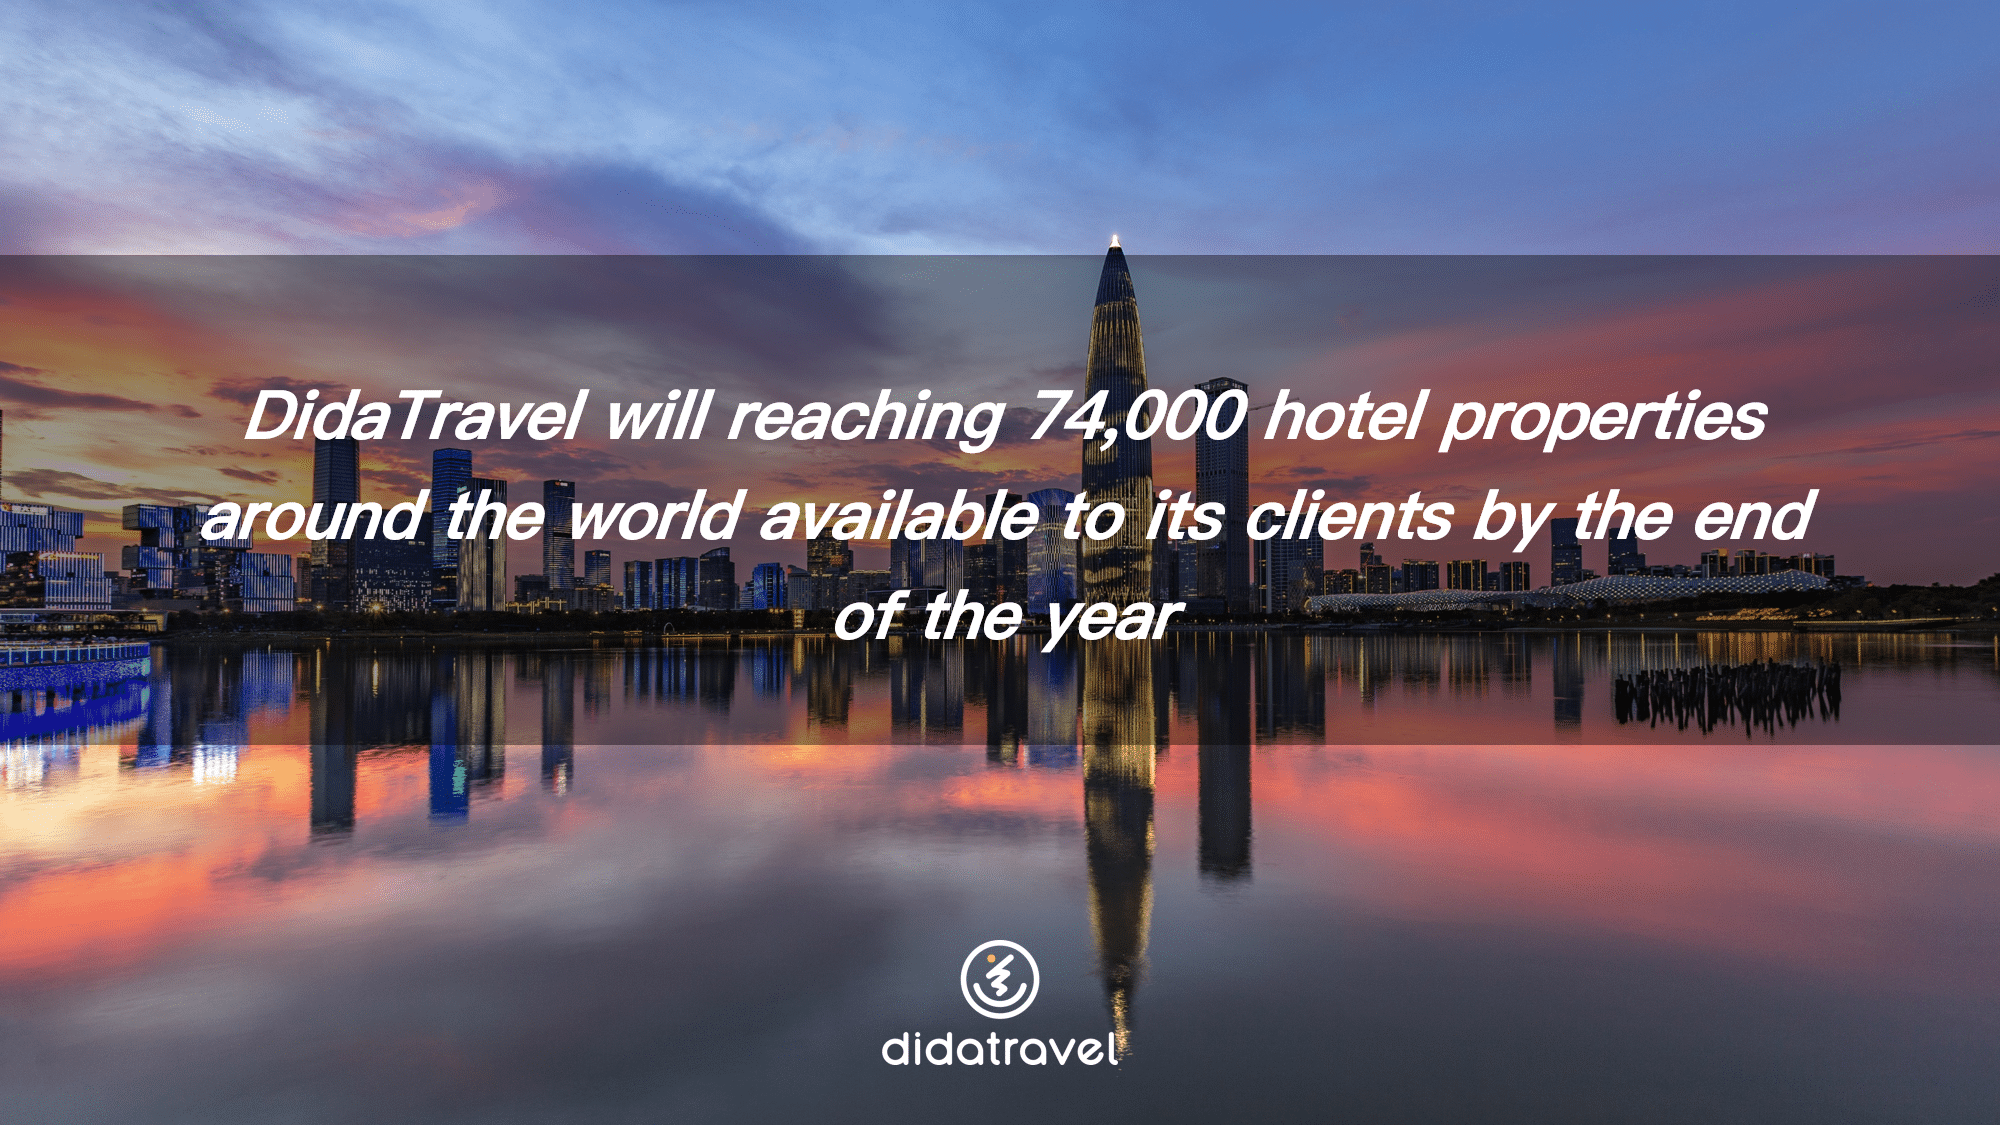 DidaTravel continues direct contracting success